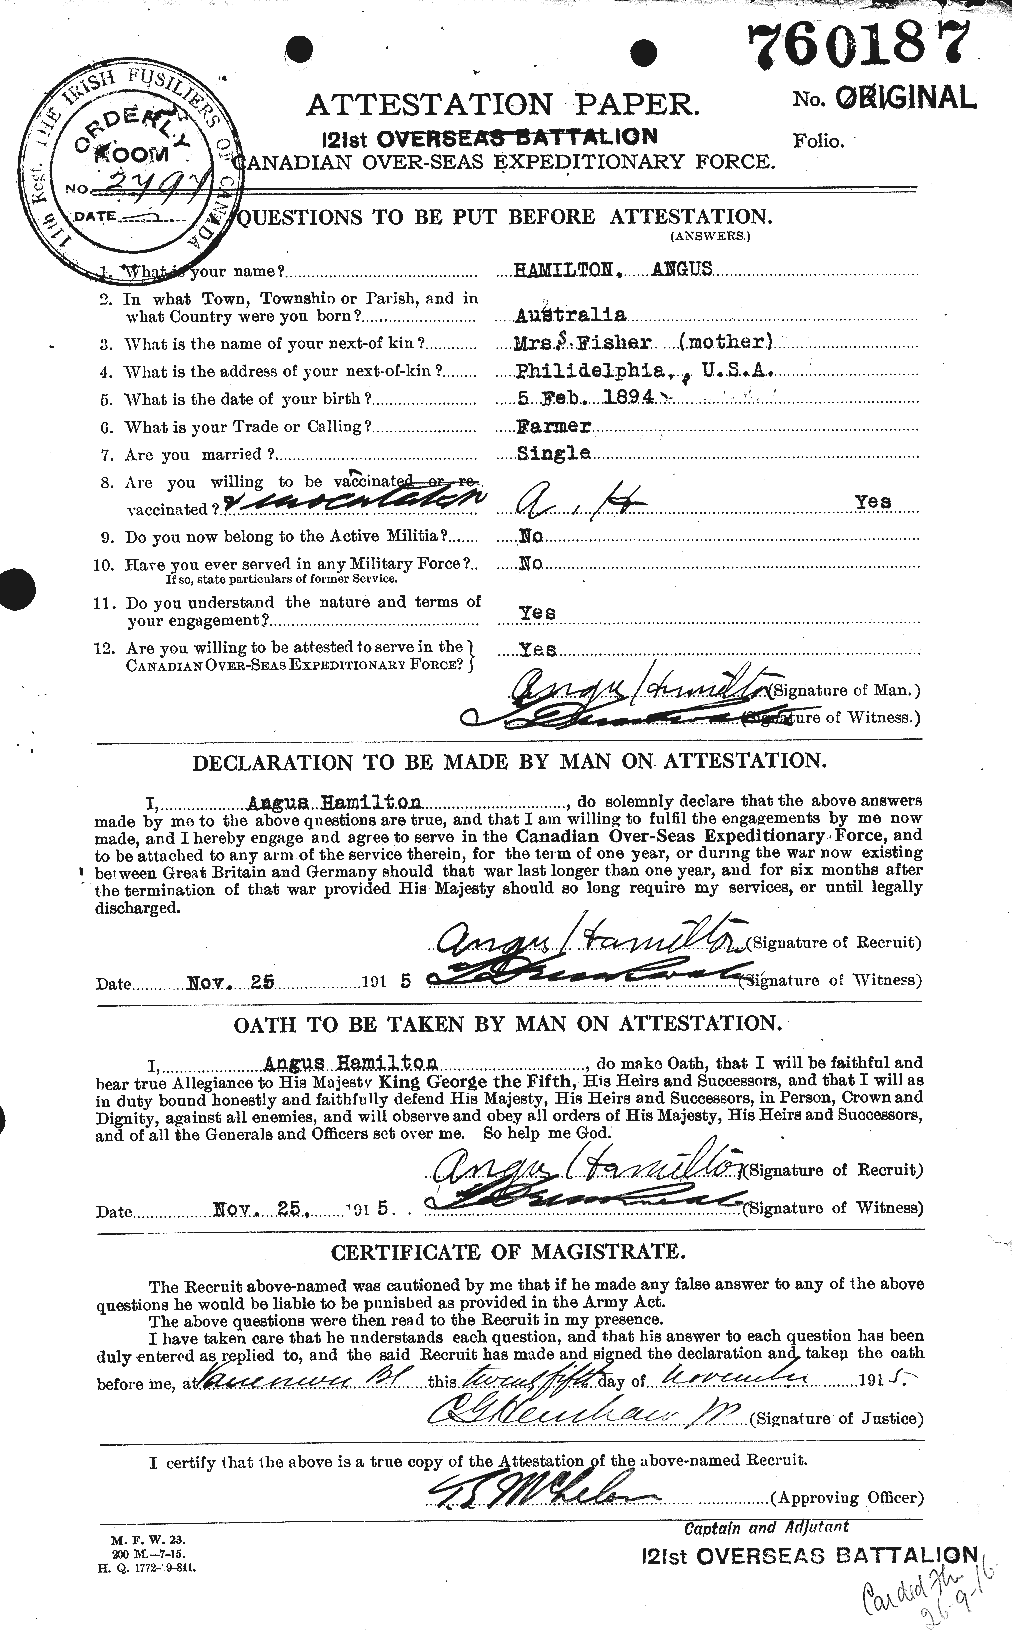 Personnel Records of the First World War - CEF 375236a